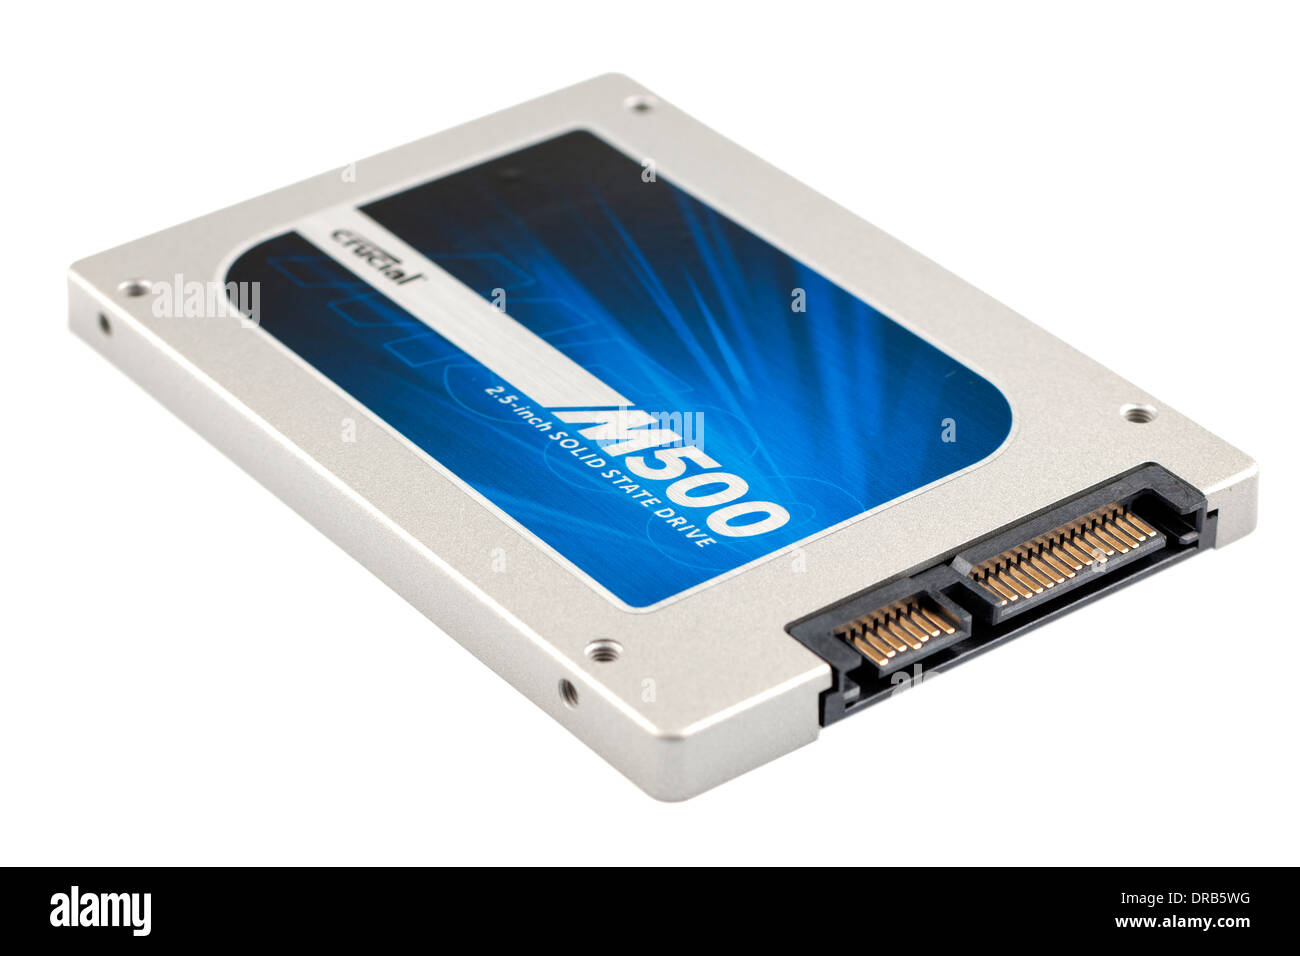 Crucial M500 2.5 inch 250 gb solid state drive sata connection Stock Photo